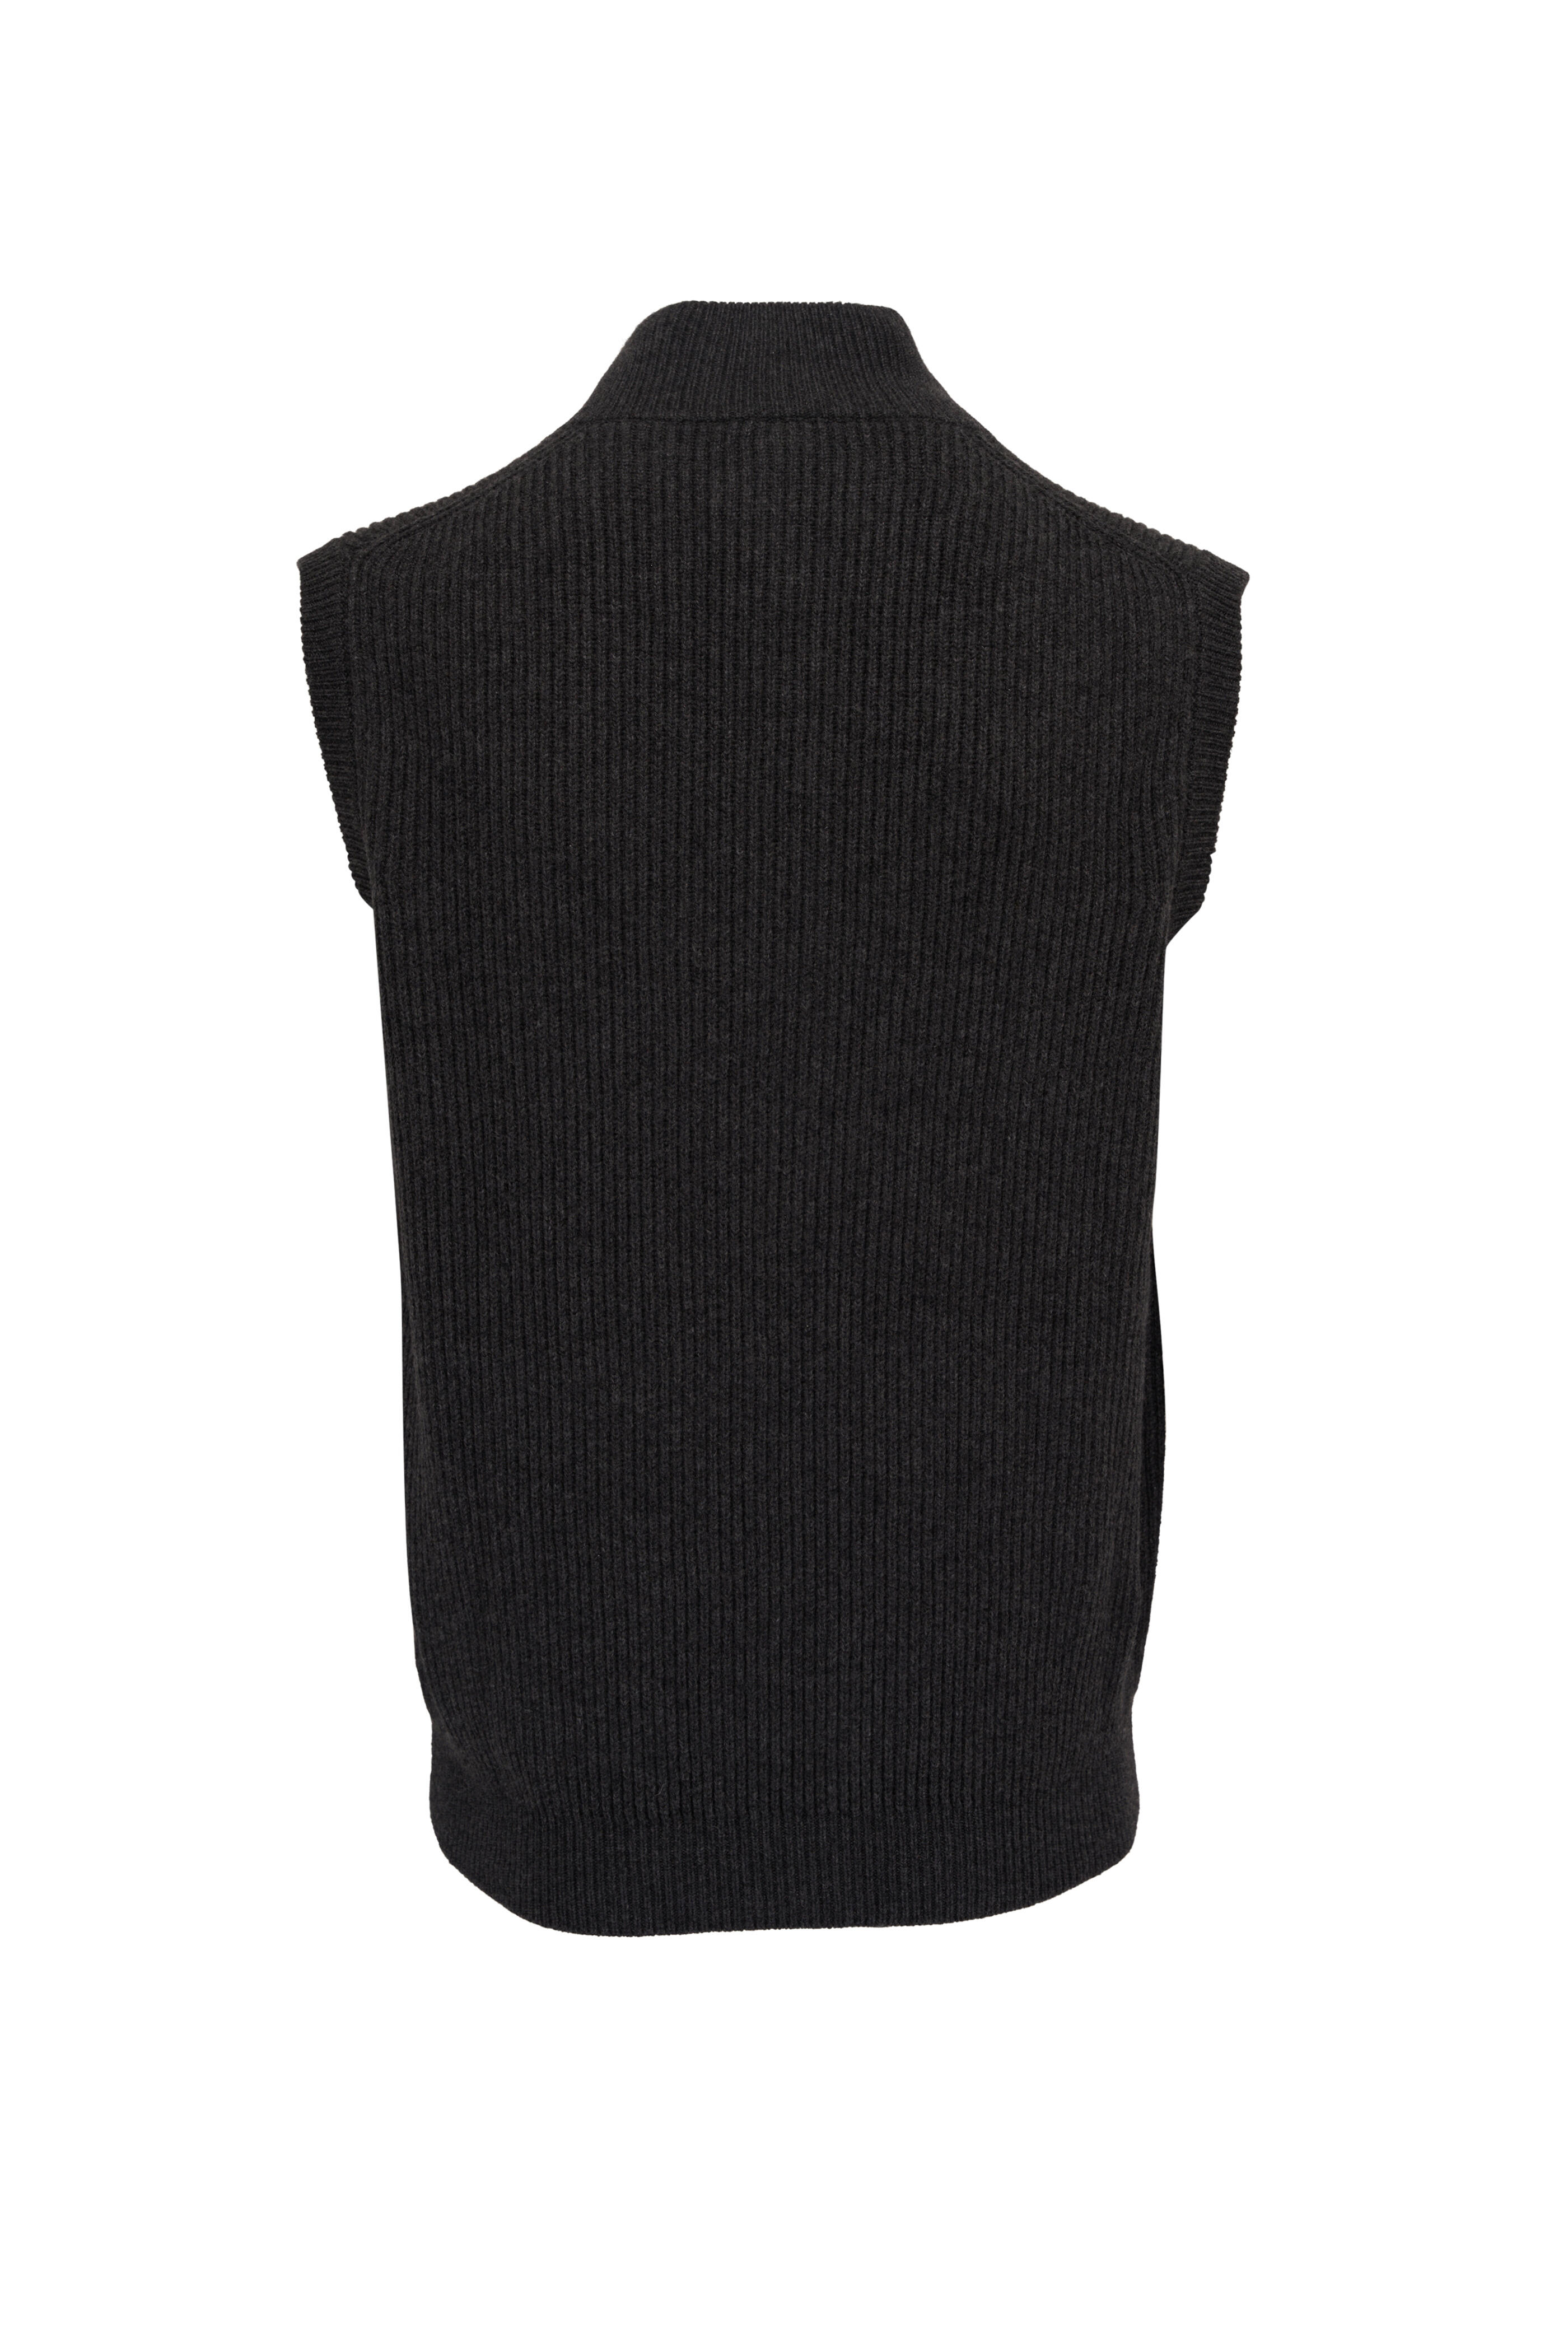 Fratelli Piacenza - Charcoal Gray Ribbed Cashmere Sweater Vest